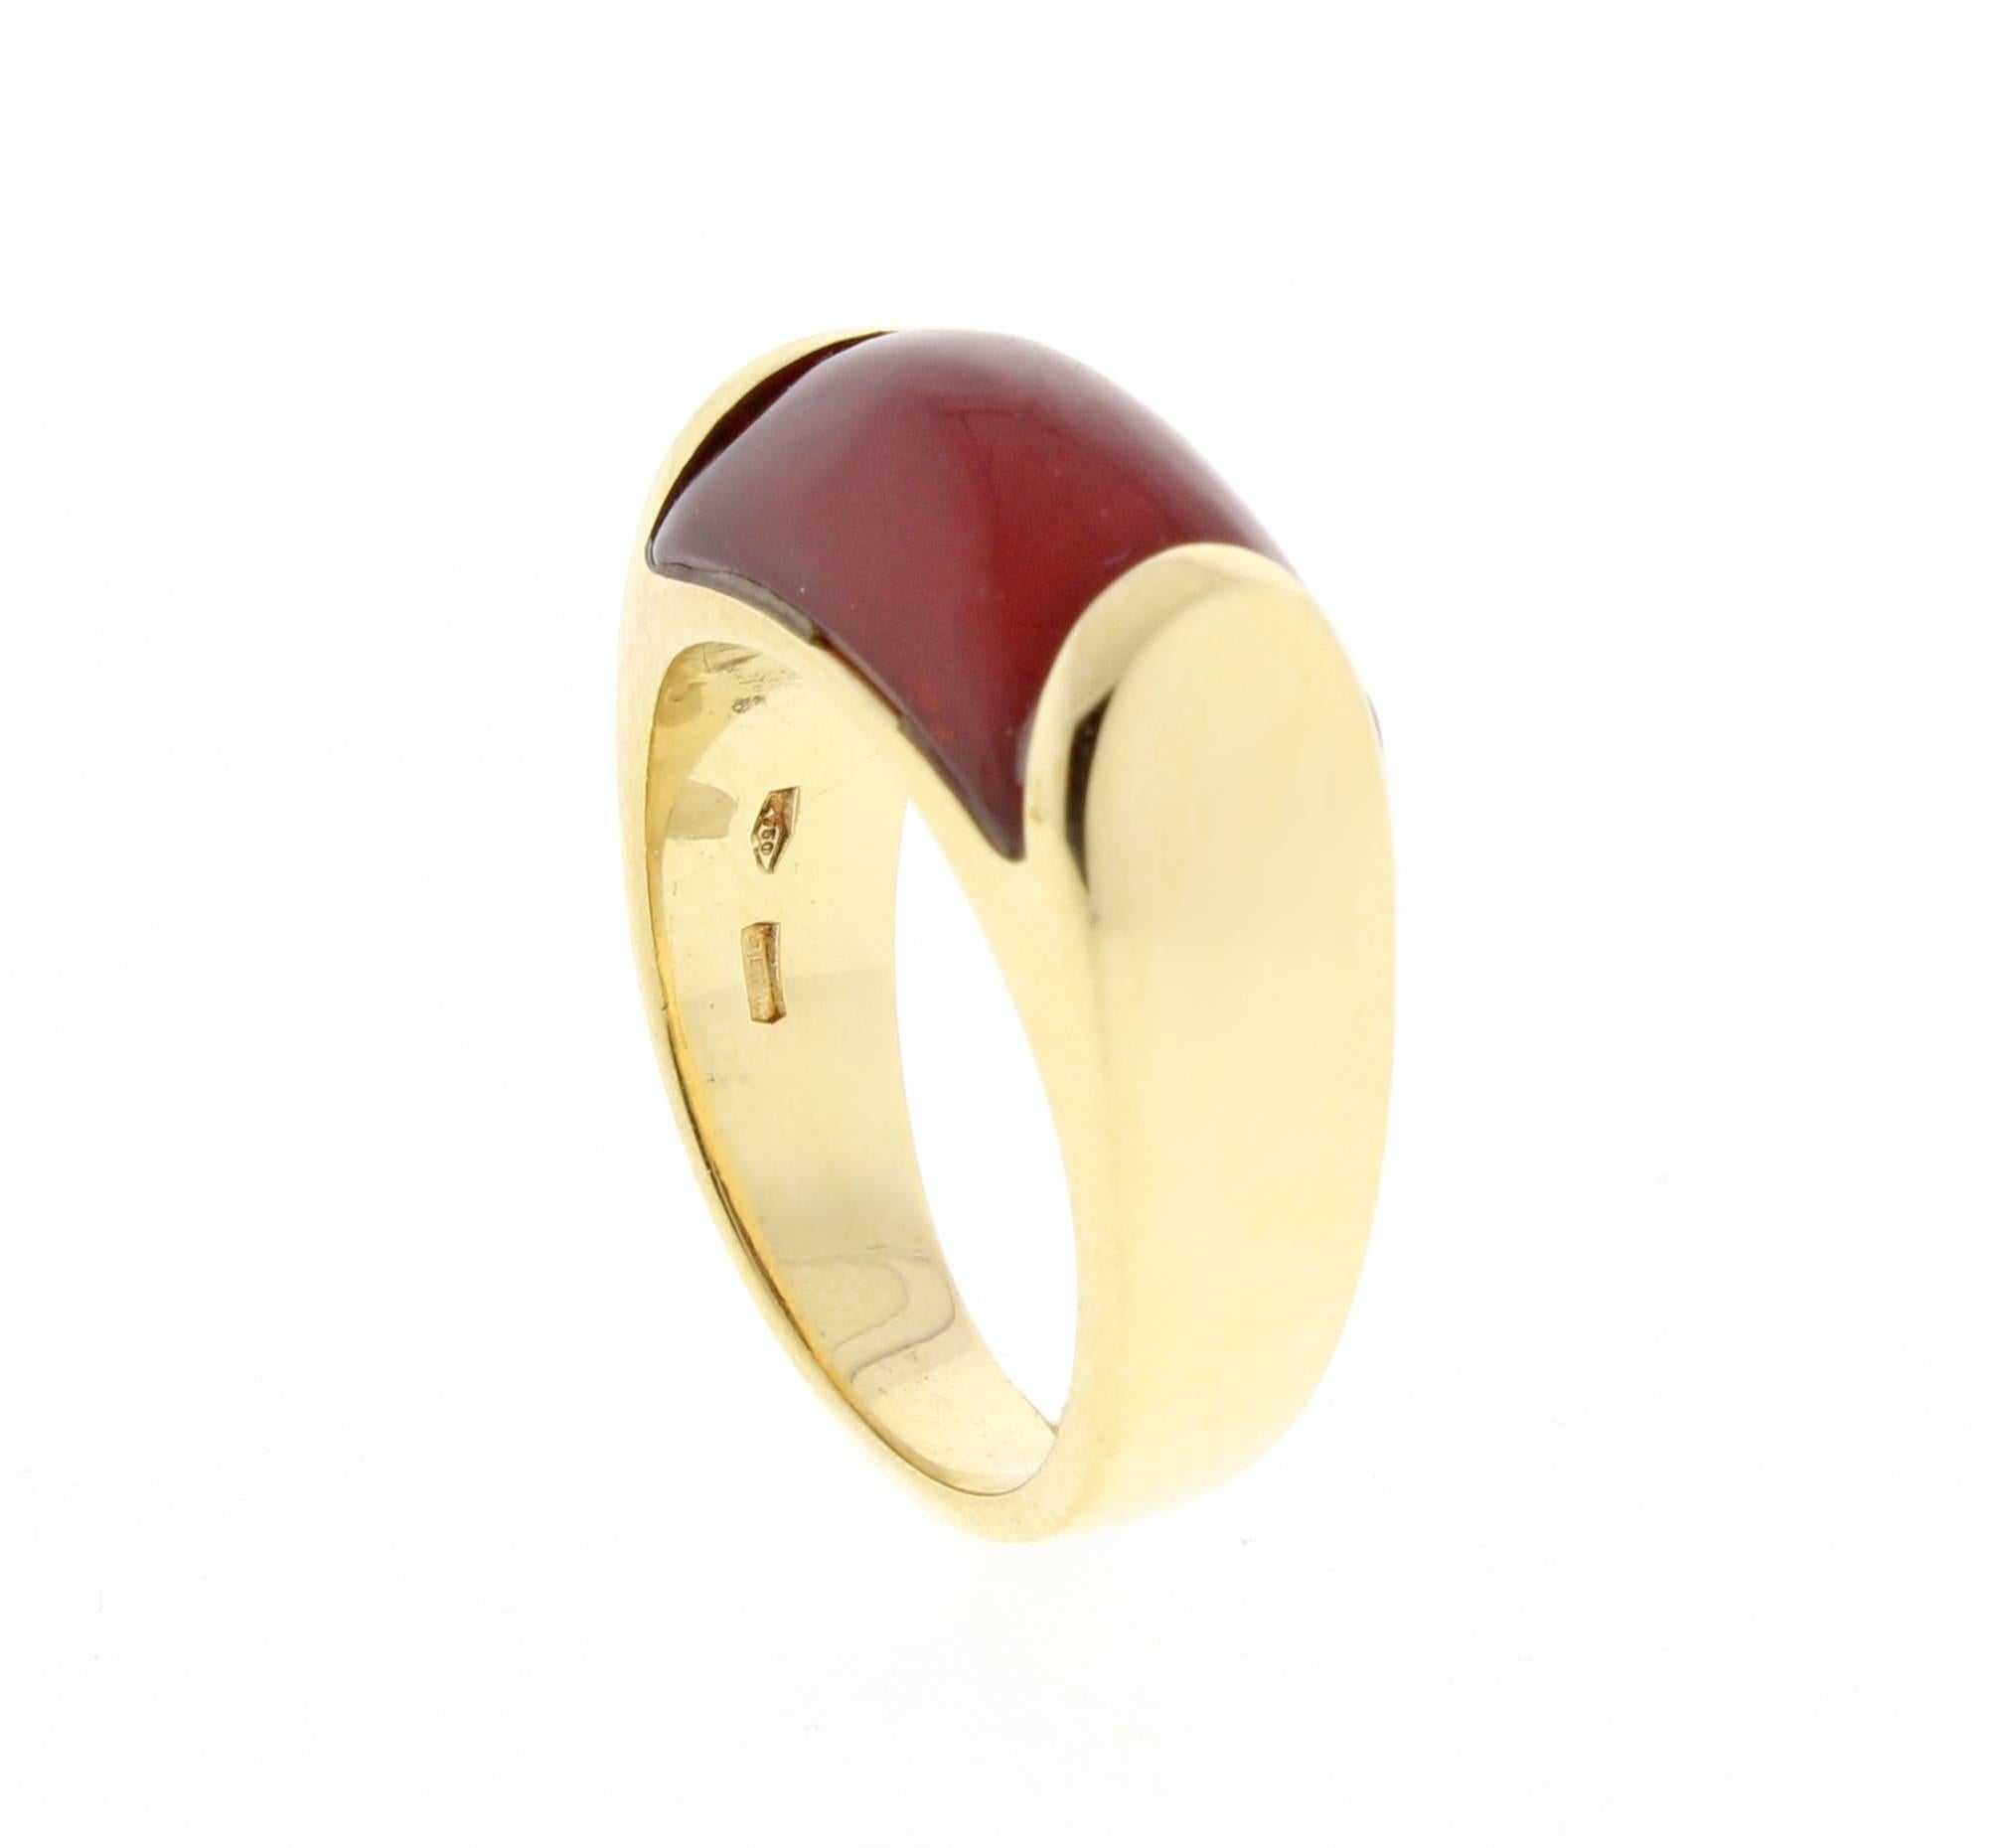 From Bulgari a tailored and stylish saddle ring from the Tronchetto collection